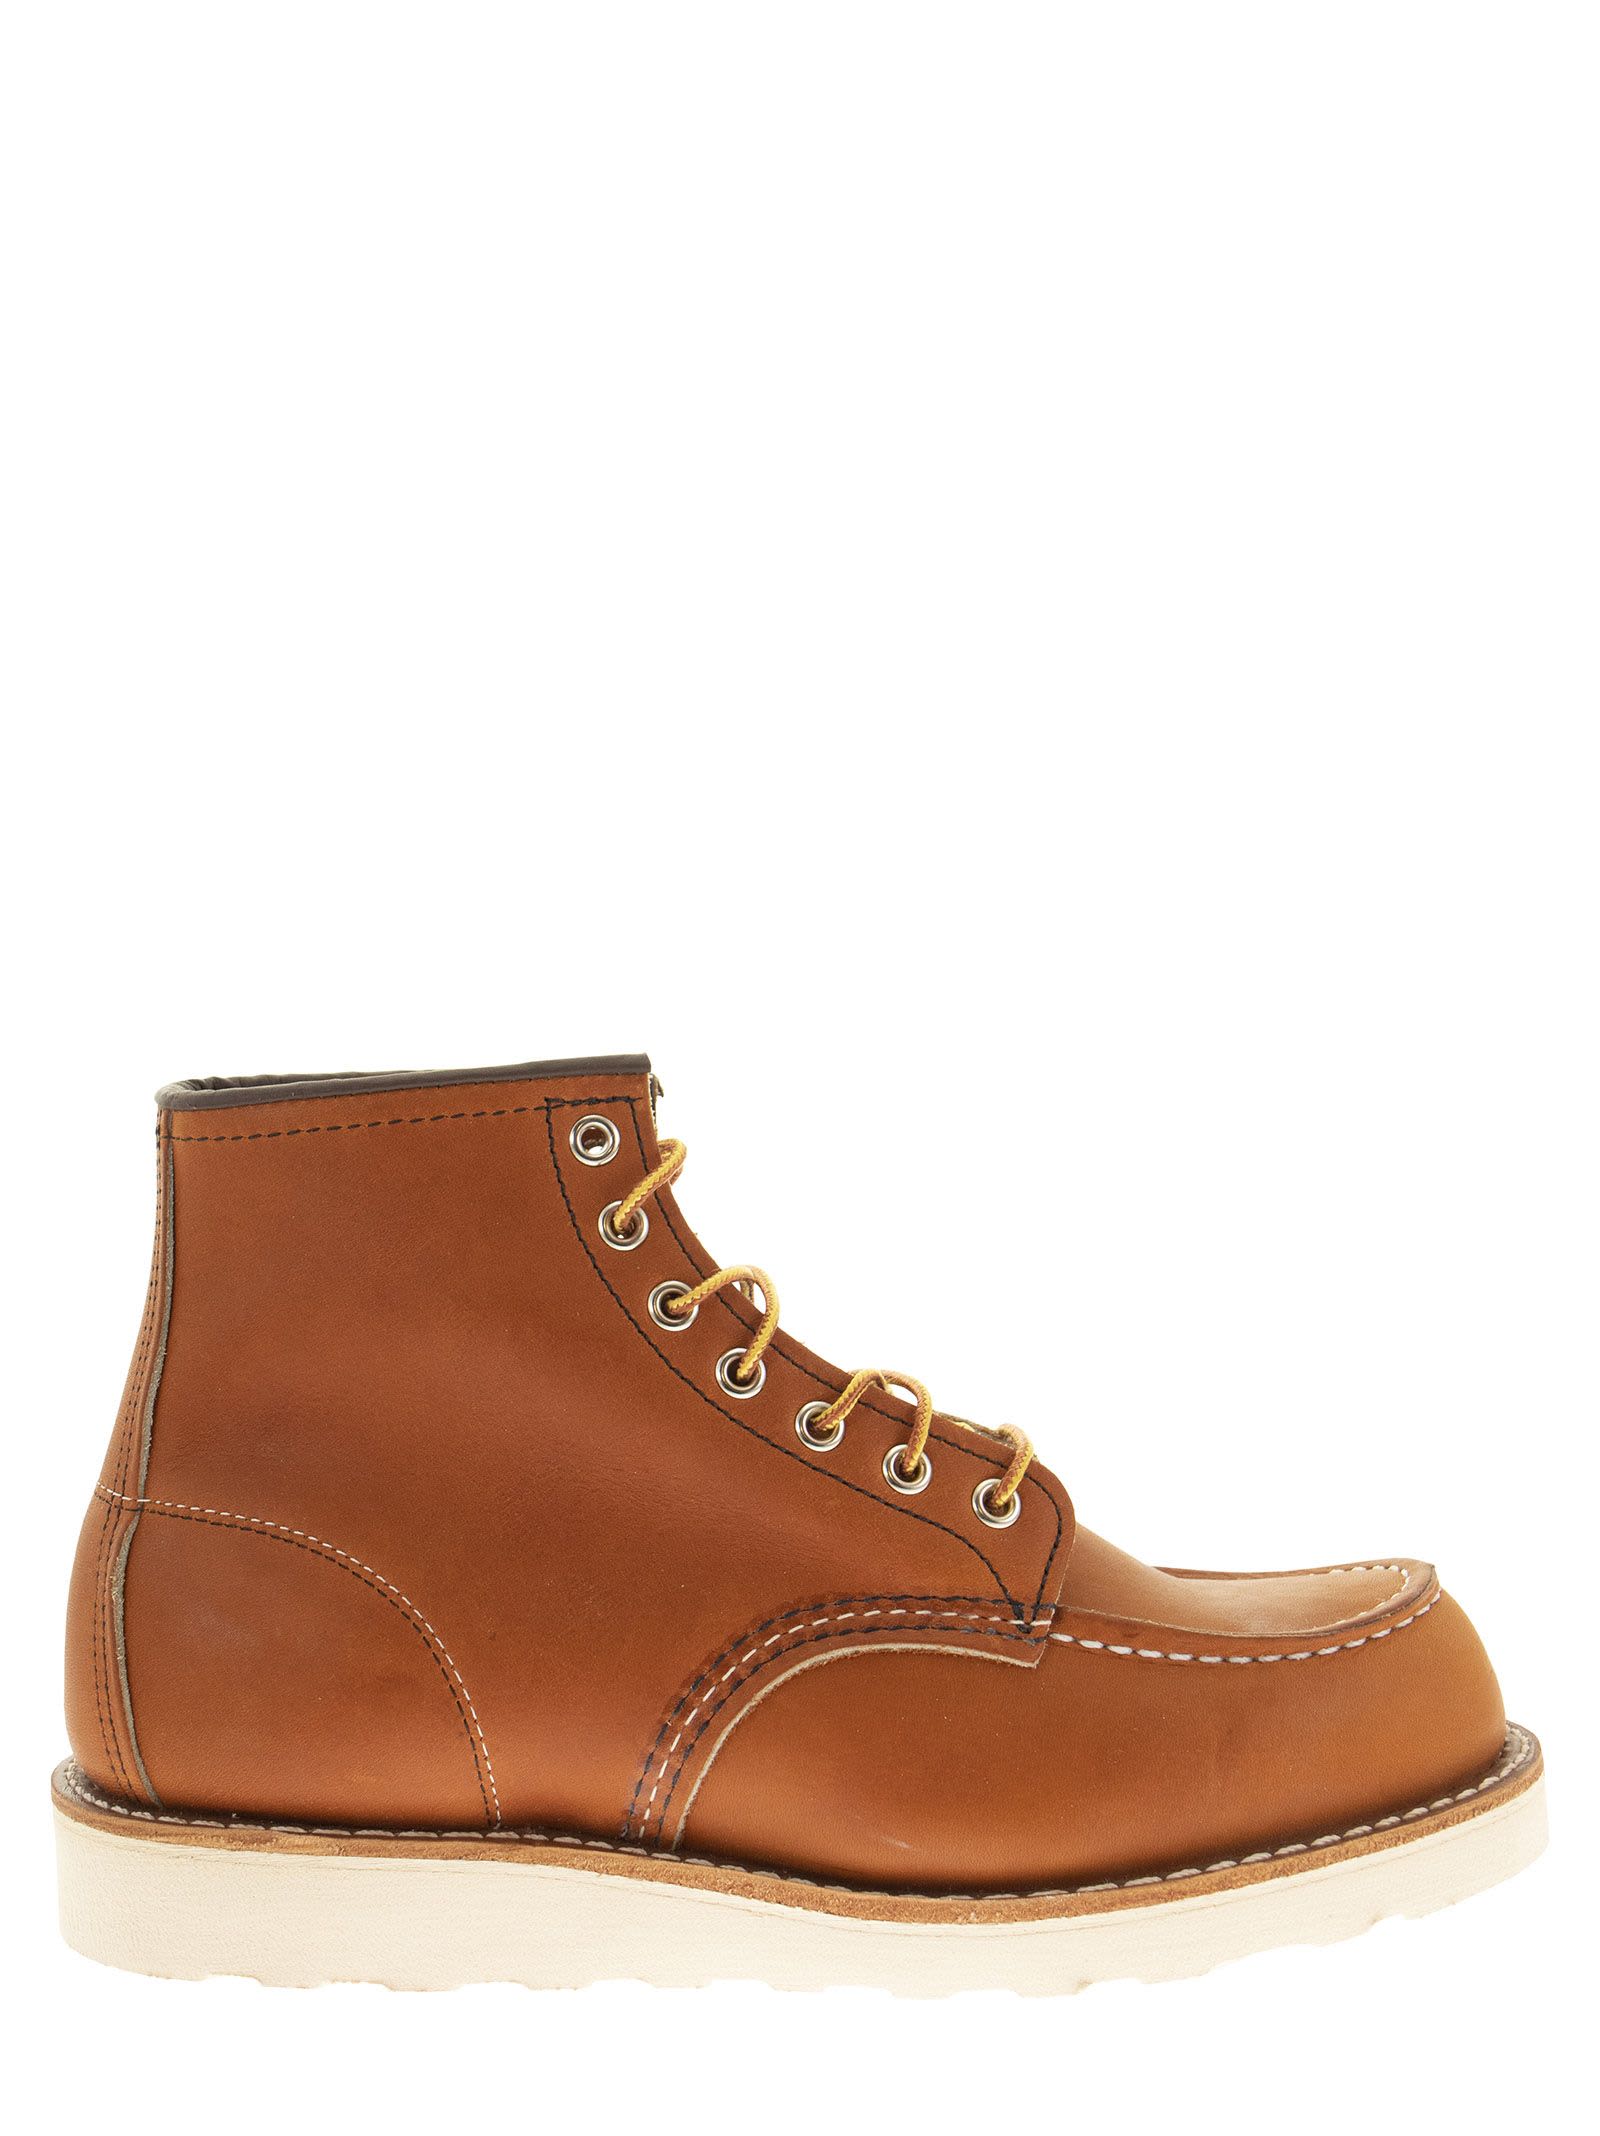 Red Wing Classic Moc 875 - Lace-up Boot